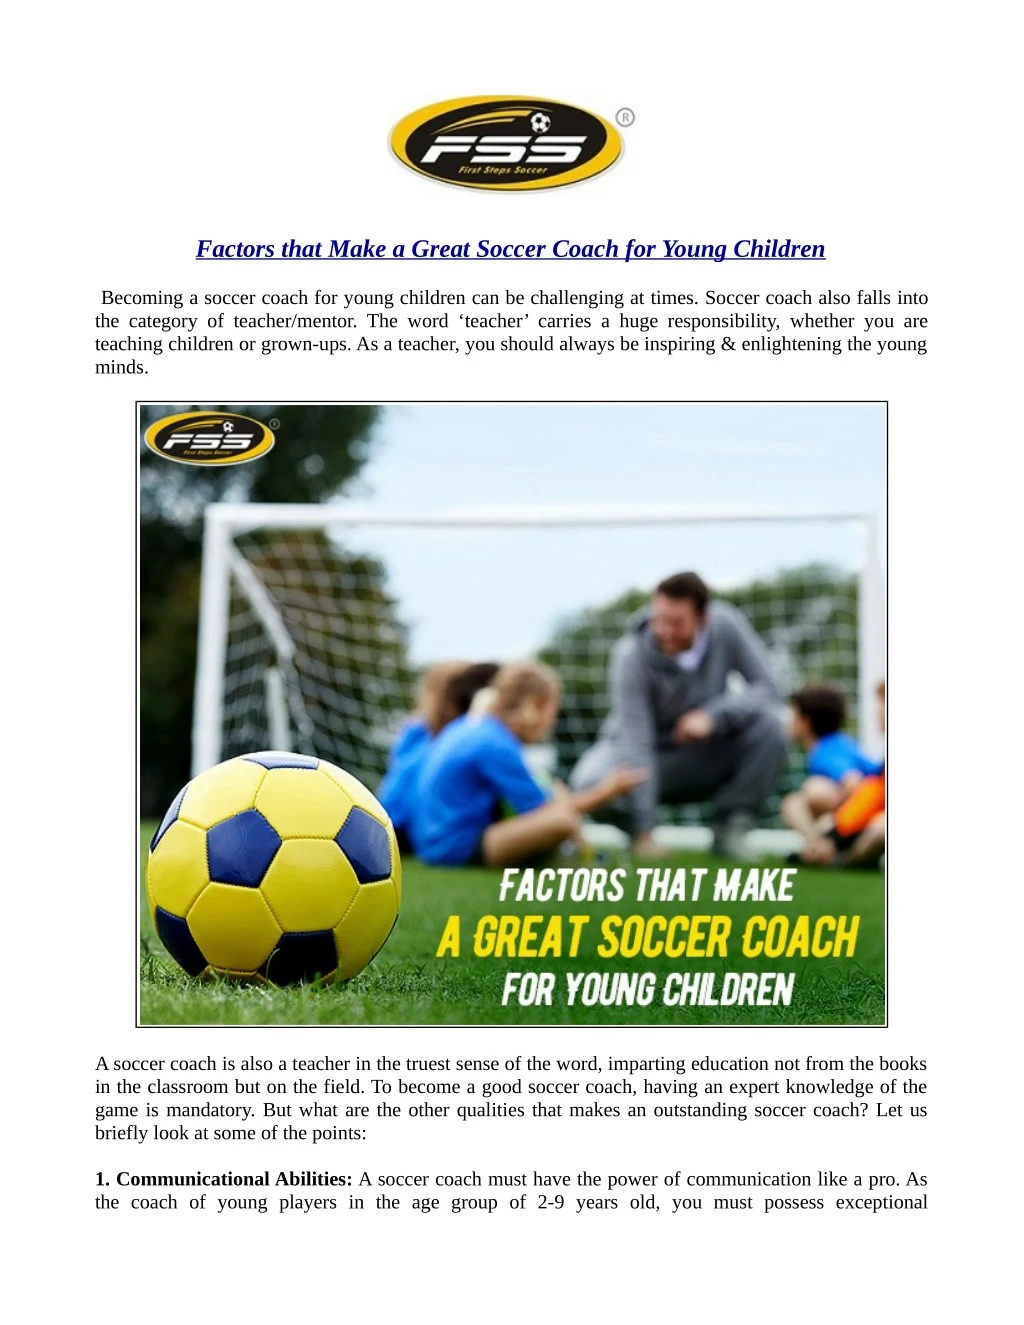 factors that make a great soccer coach for young